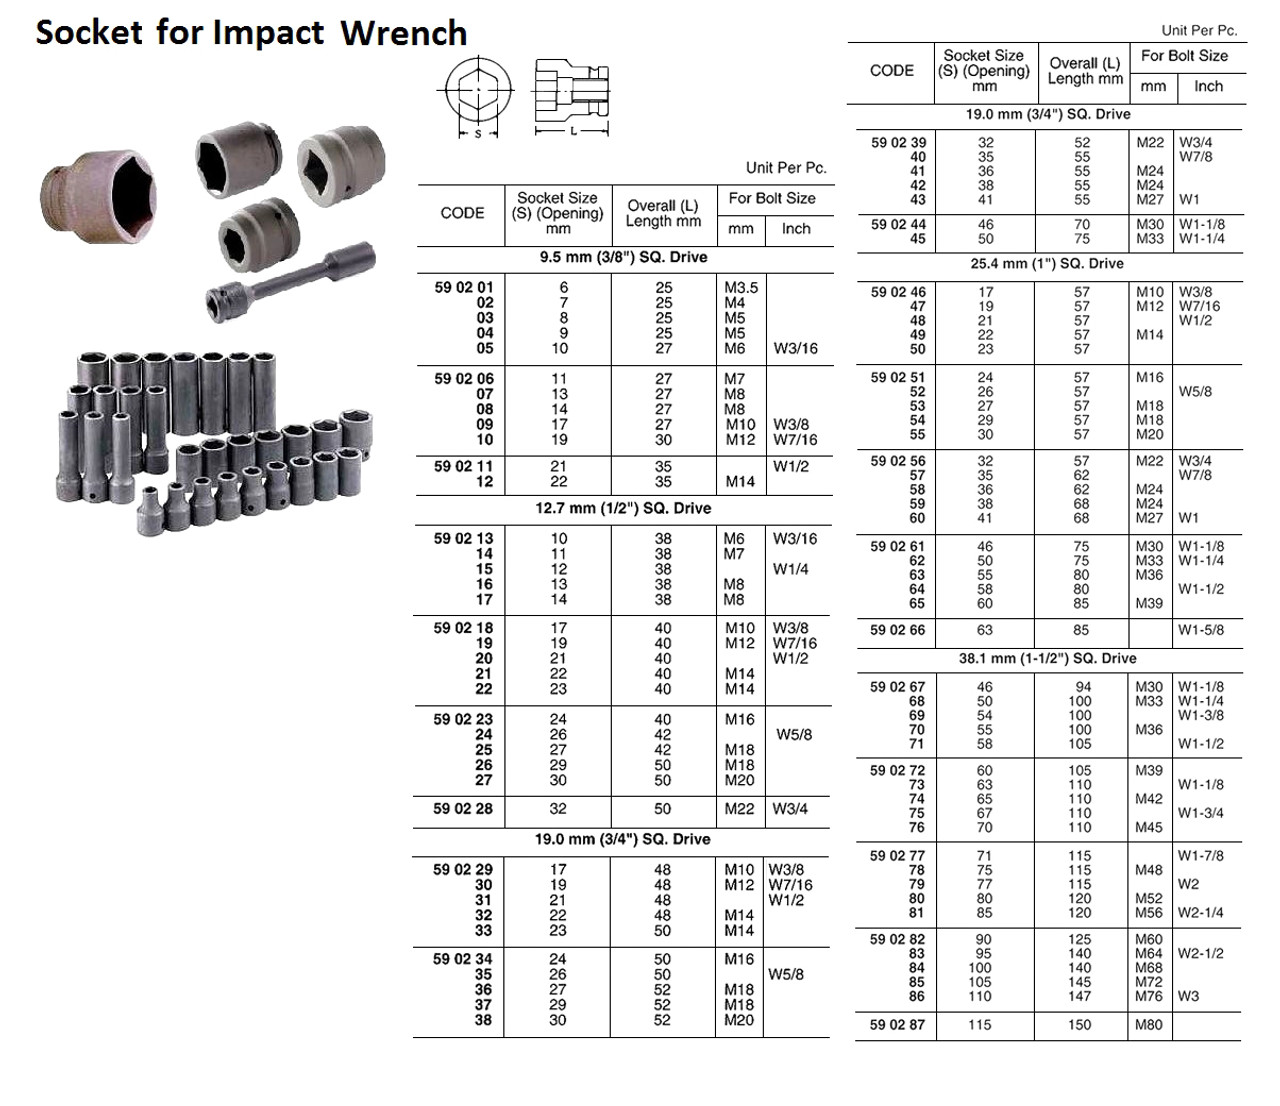 IMPA 590252 WRENCH IMPACT SOCKET 26mm Square Drive 1"